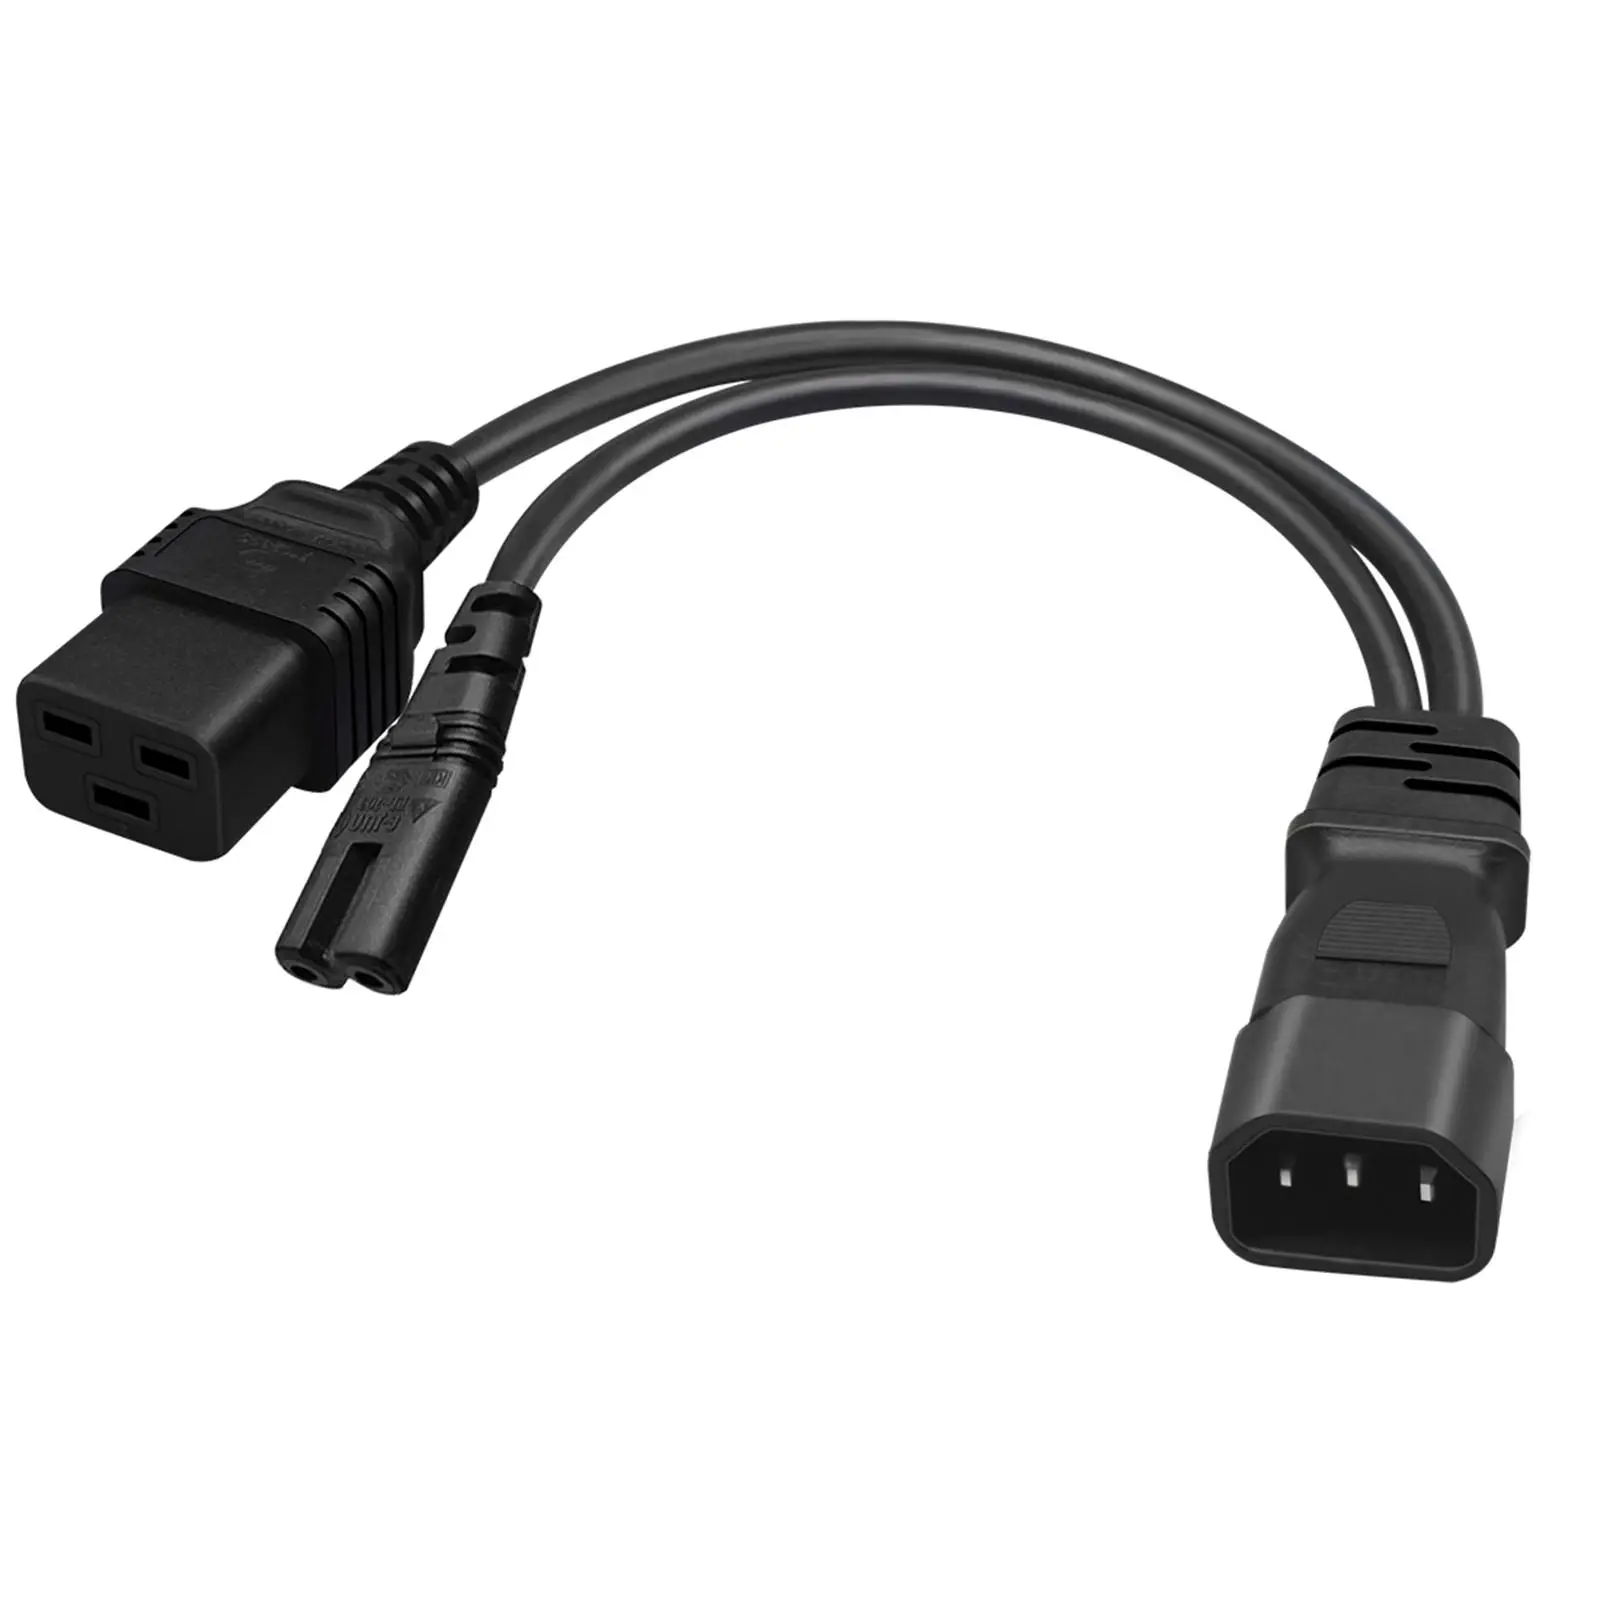 C14 Male to C7 Female Convertor Cord Extension Cord Stable Transmission C14 to C7 Power Cable